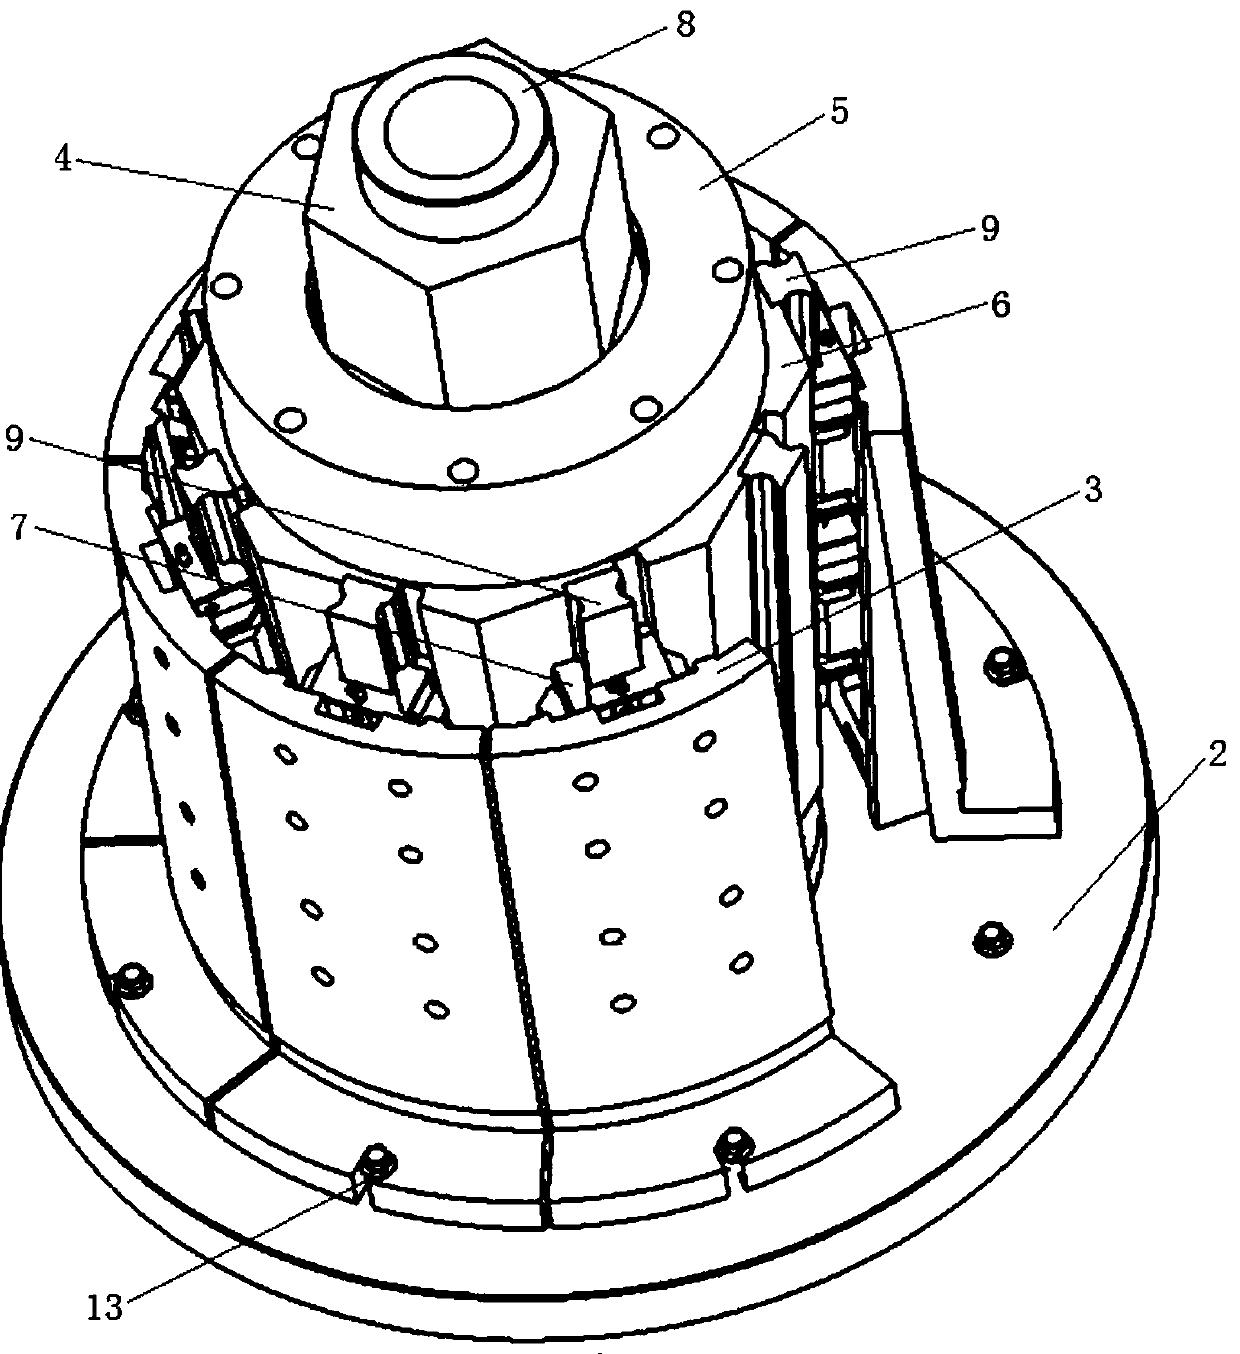 Bulging tooling and clamping method for large-size thin-walled cylindrical parts